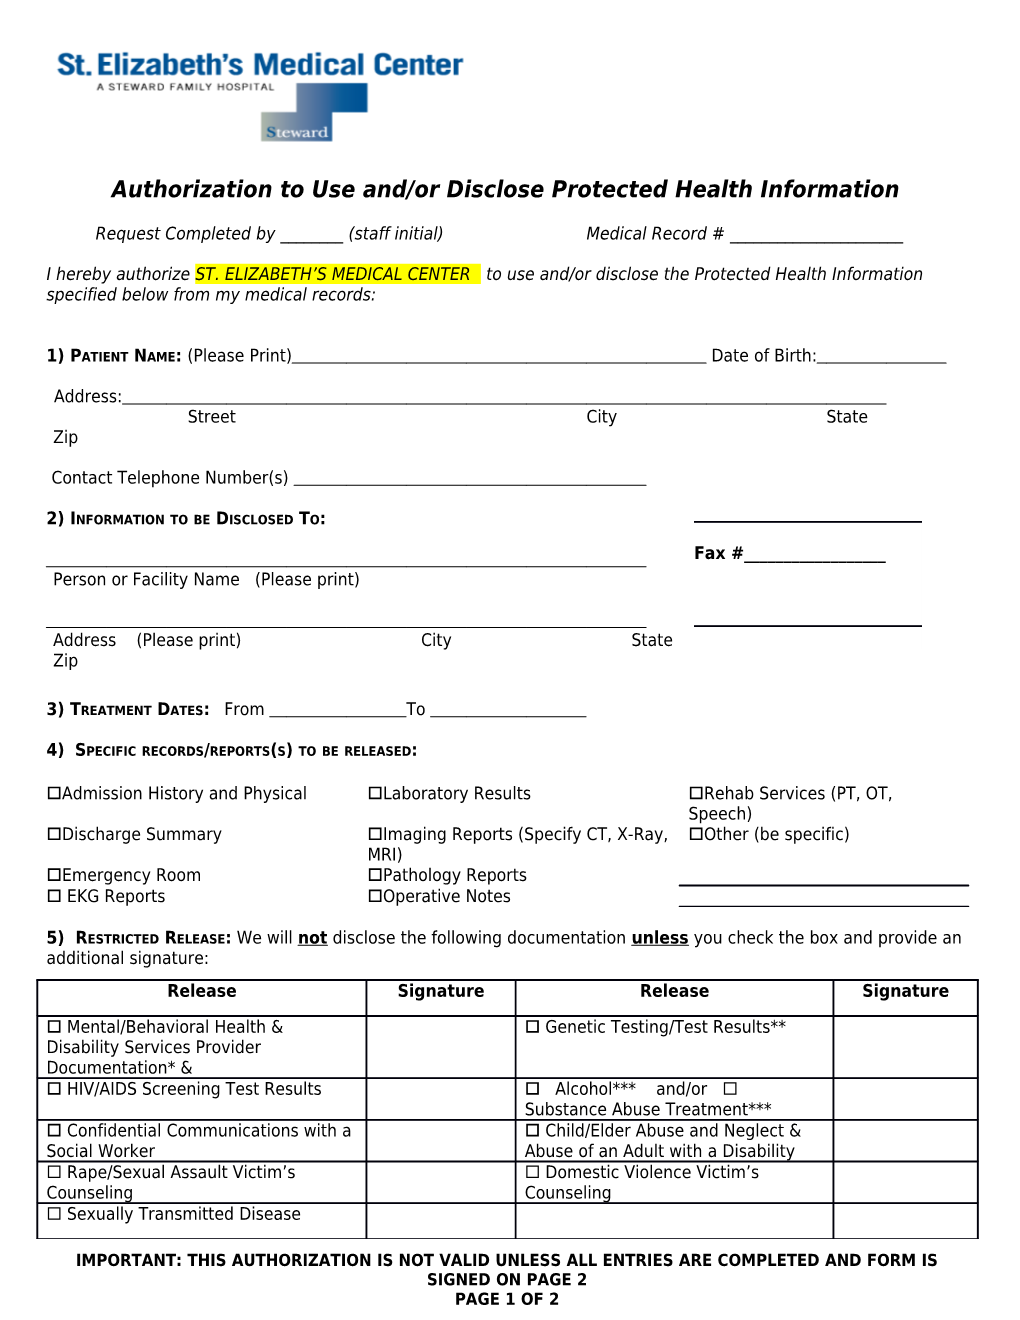 Authorization to Use And/Or Disclose Protected Health Information